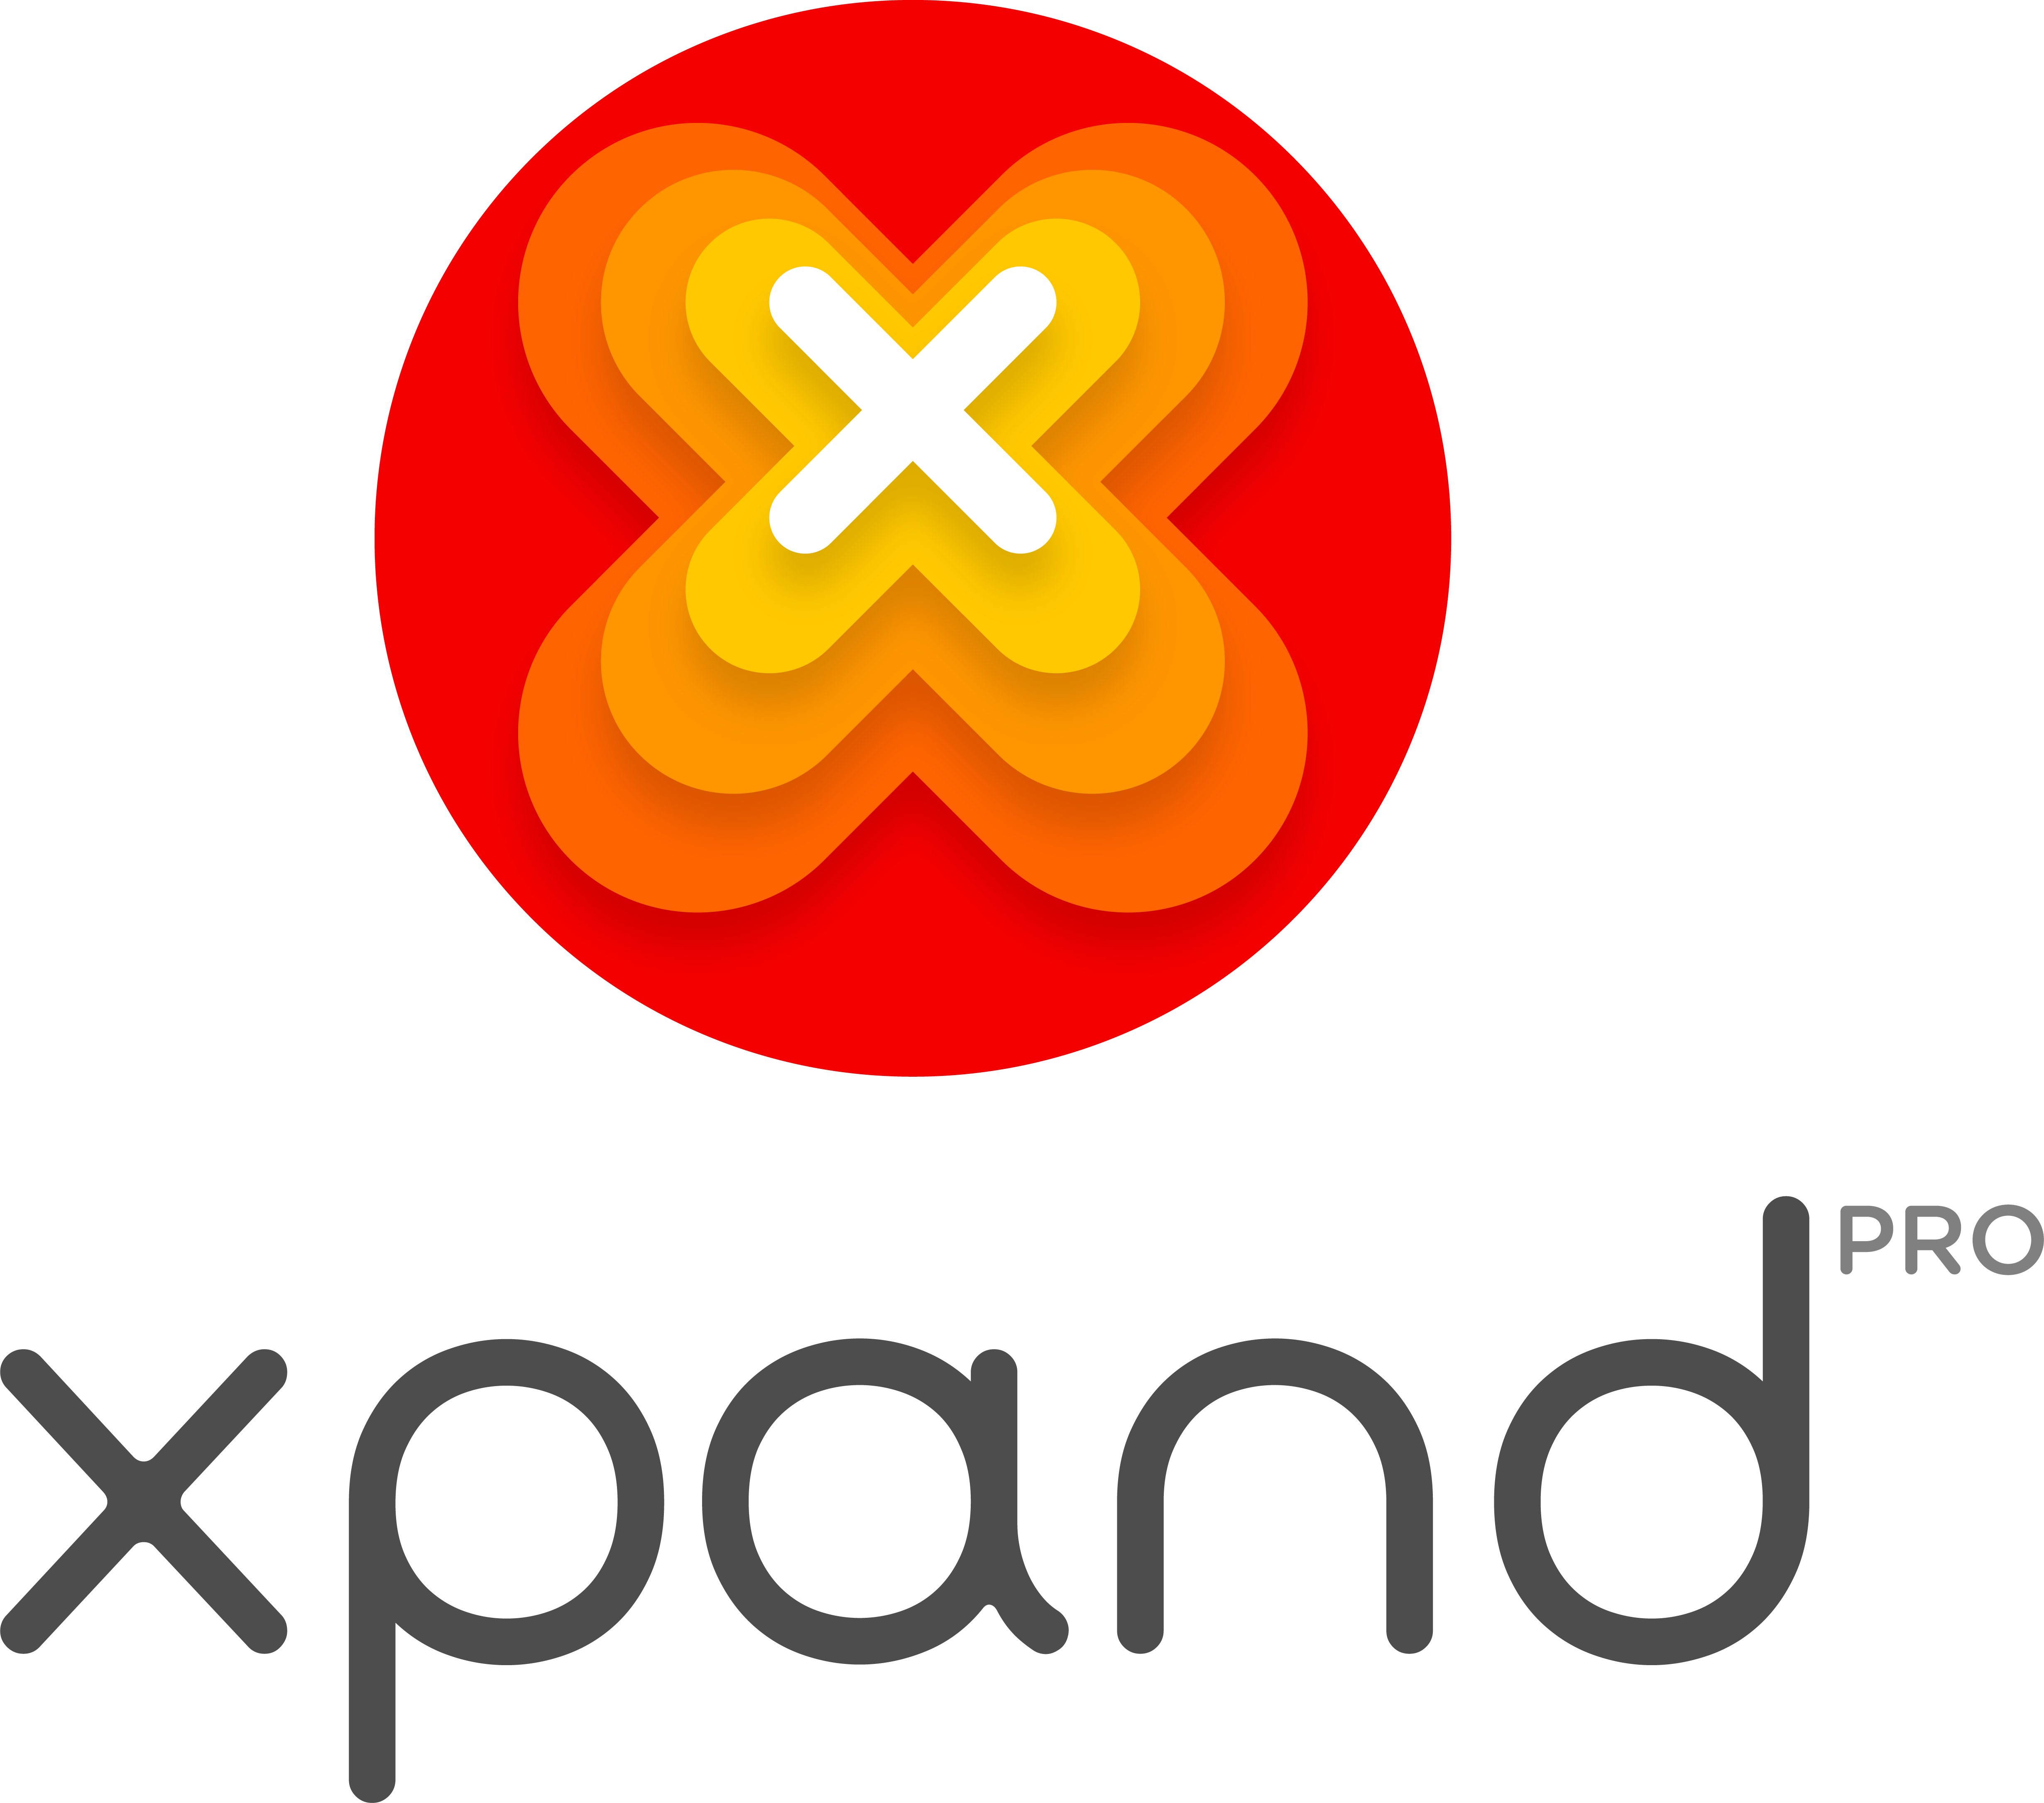 XPAND PRO - Coaching, Training and Consulting